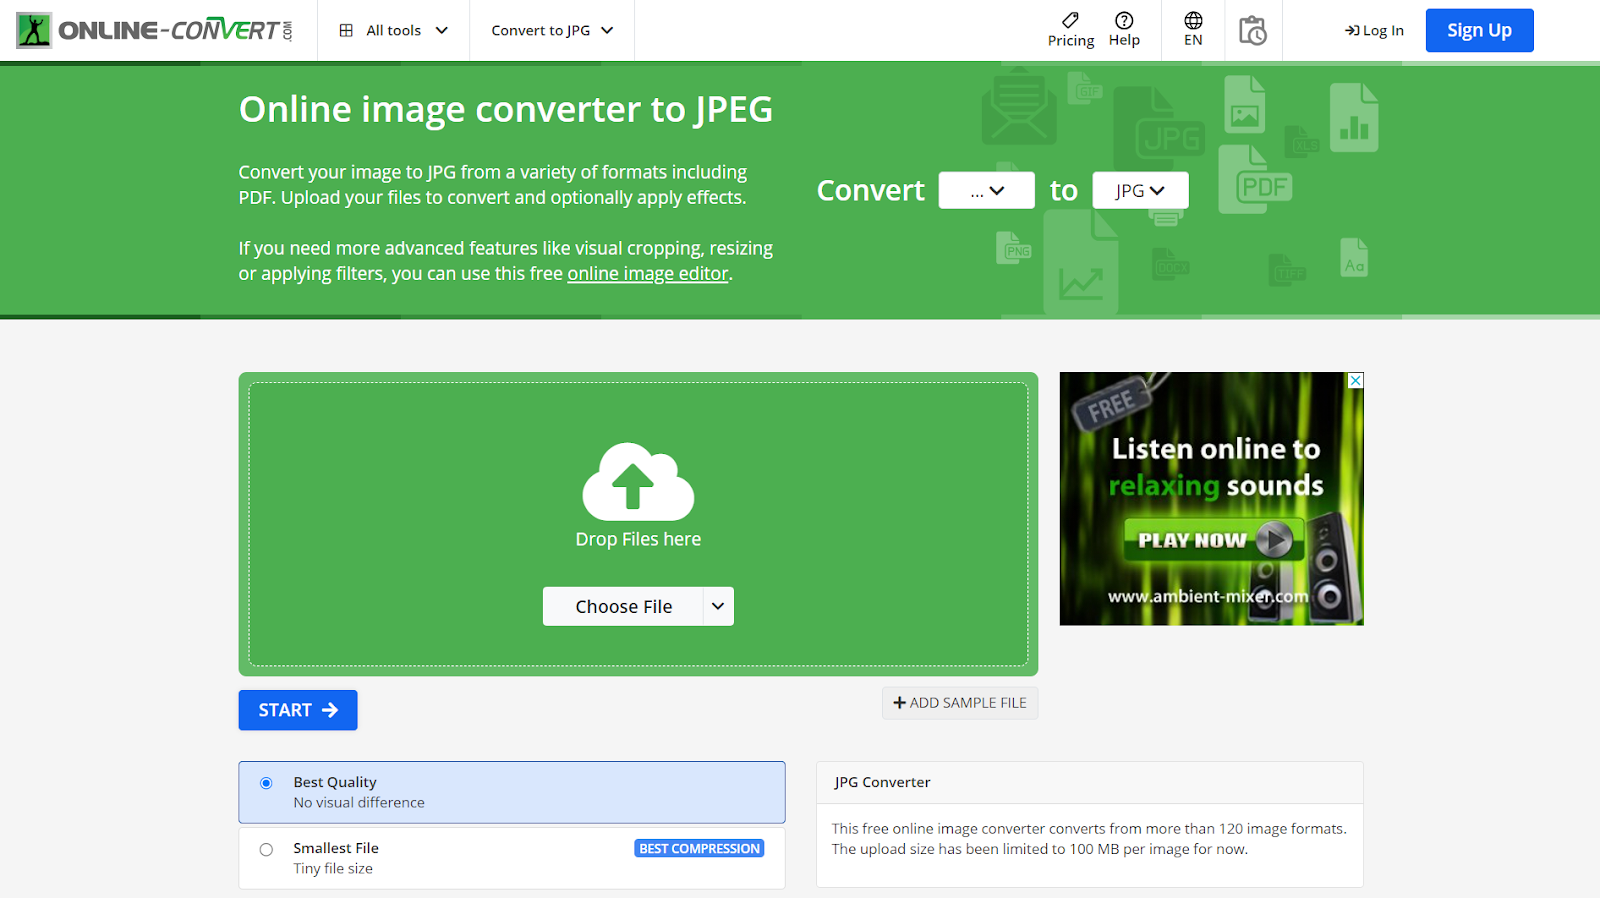 Online convert jpg vs jpeg comparison [everything you need to know] from the plus addons for elementor